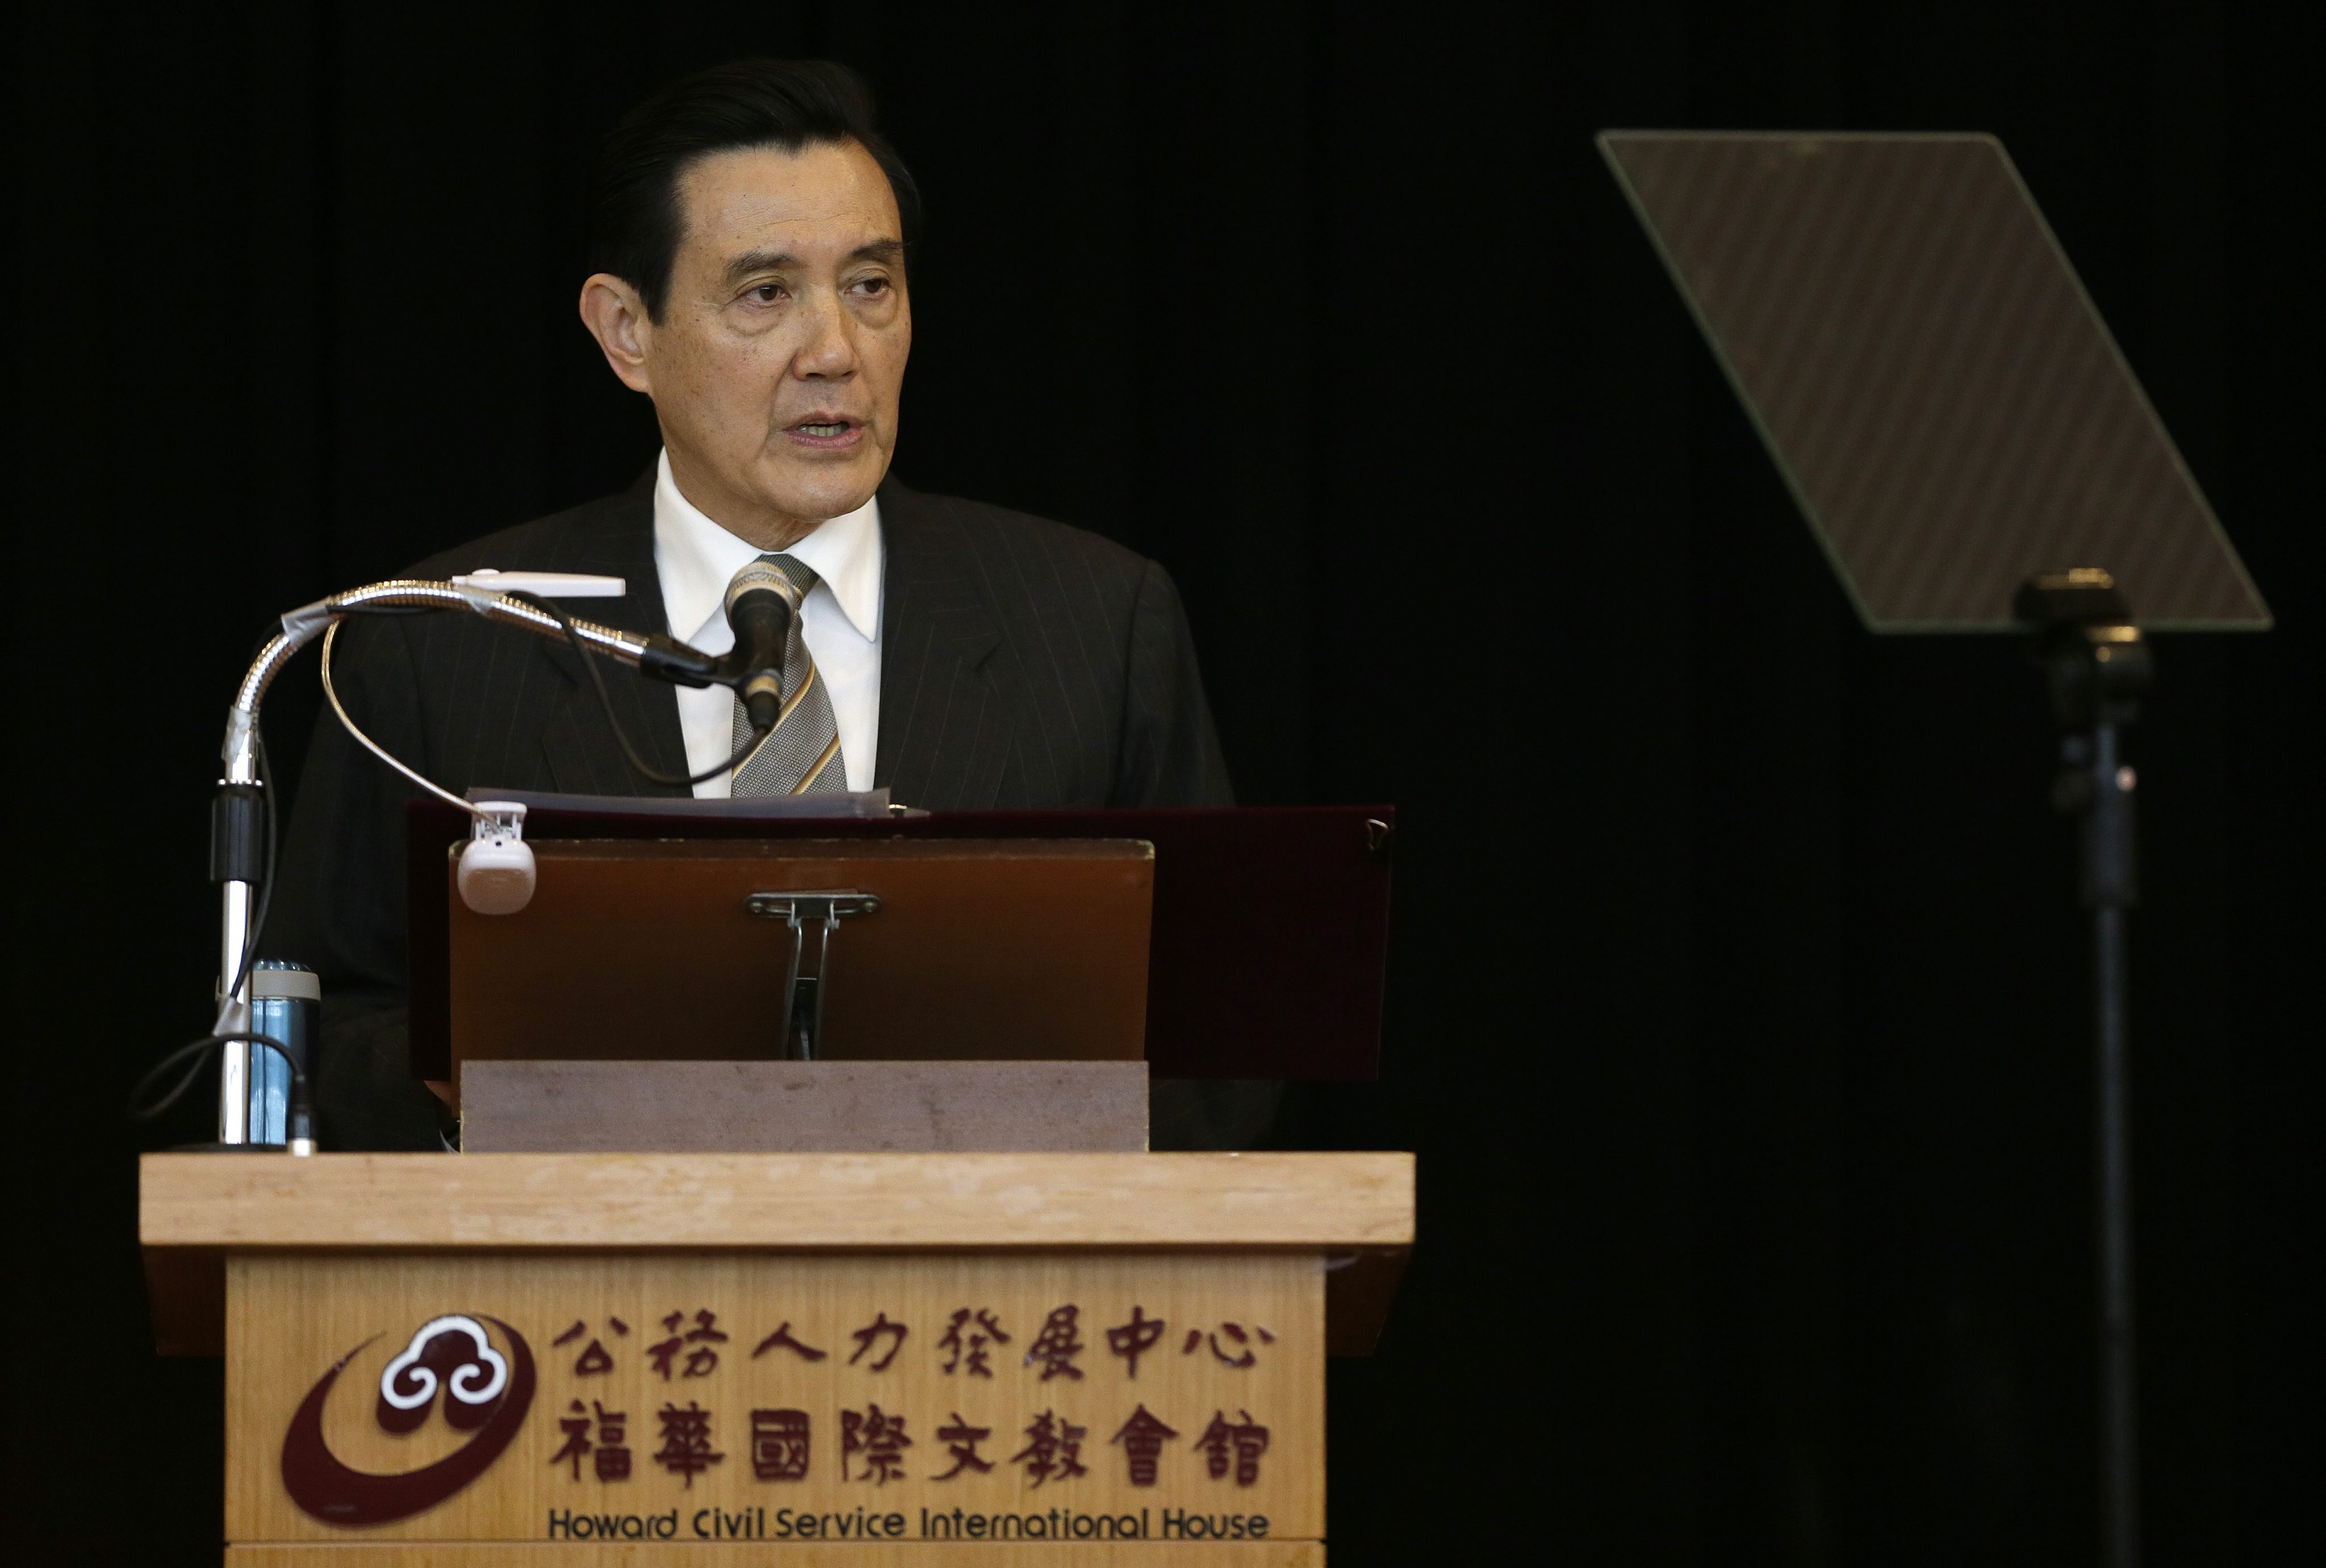 epa05110018 Taiwan President Ma Ying-jeou addresses attendees about South China islands during the Scientific International Seminar on South China inside Howard Civil Service International House in Taipei, Taiwan, 19 January 2016. EPA/RITCHIE B. TONGO